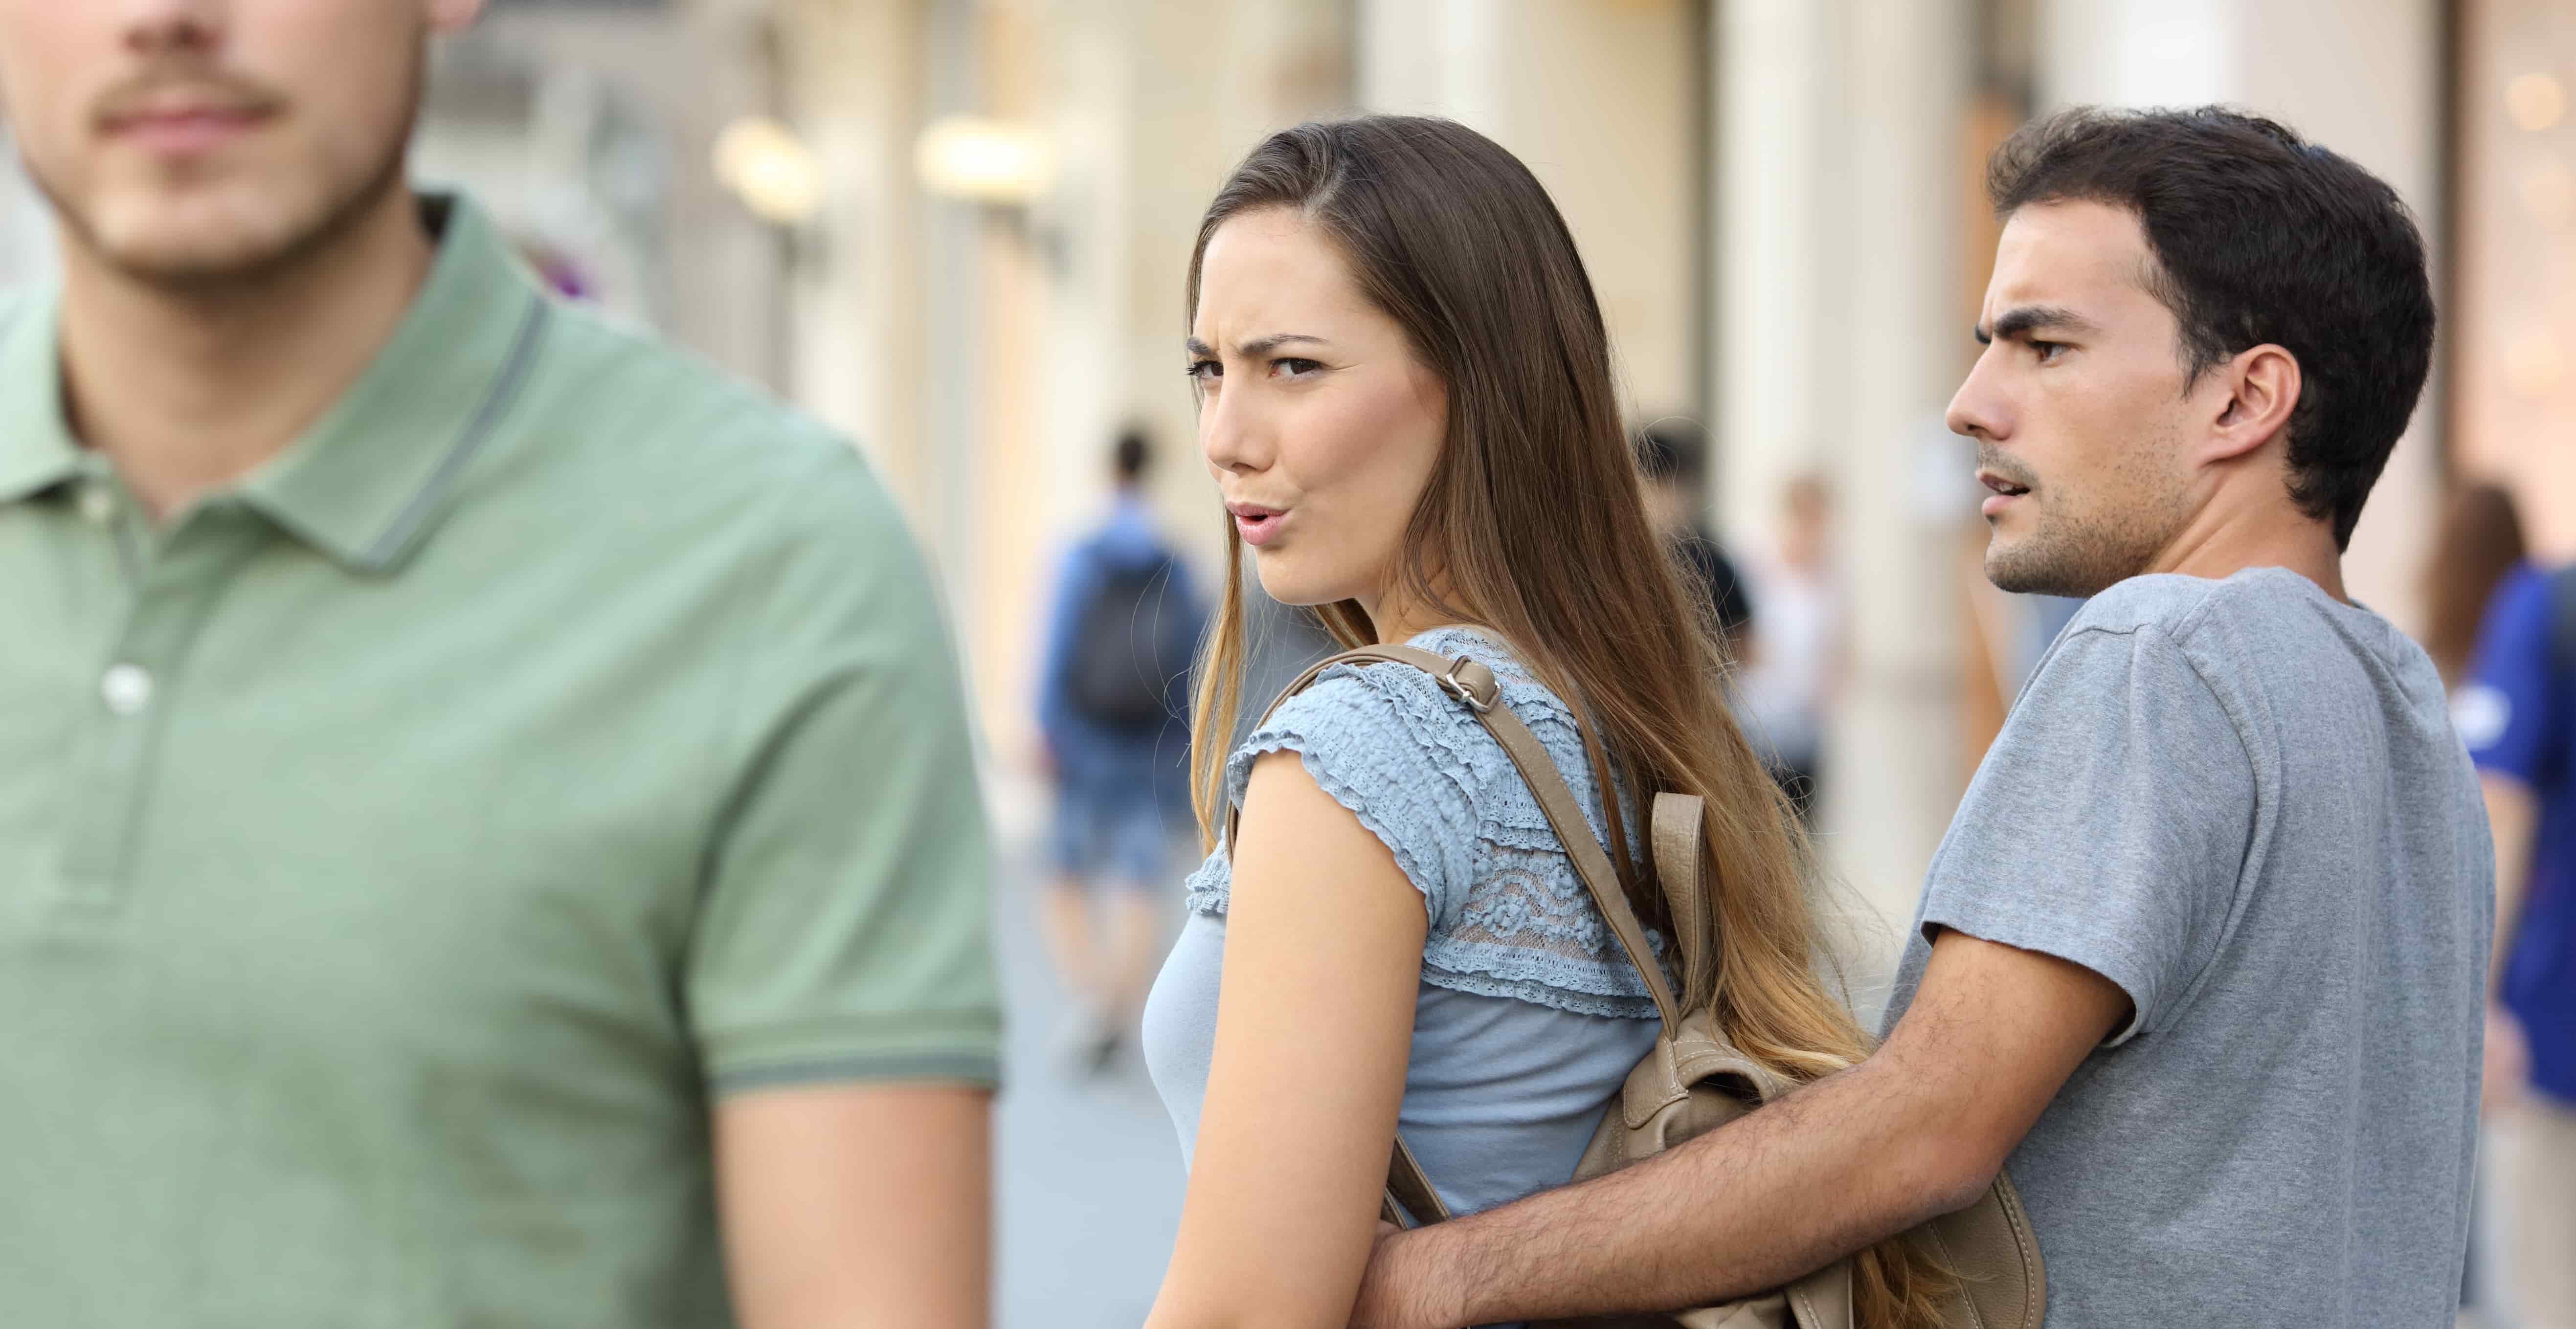 Disloyal woman looking another man and her angry boyfriend looking at her on the street